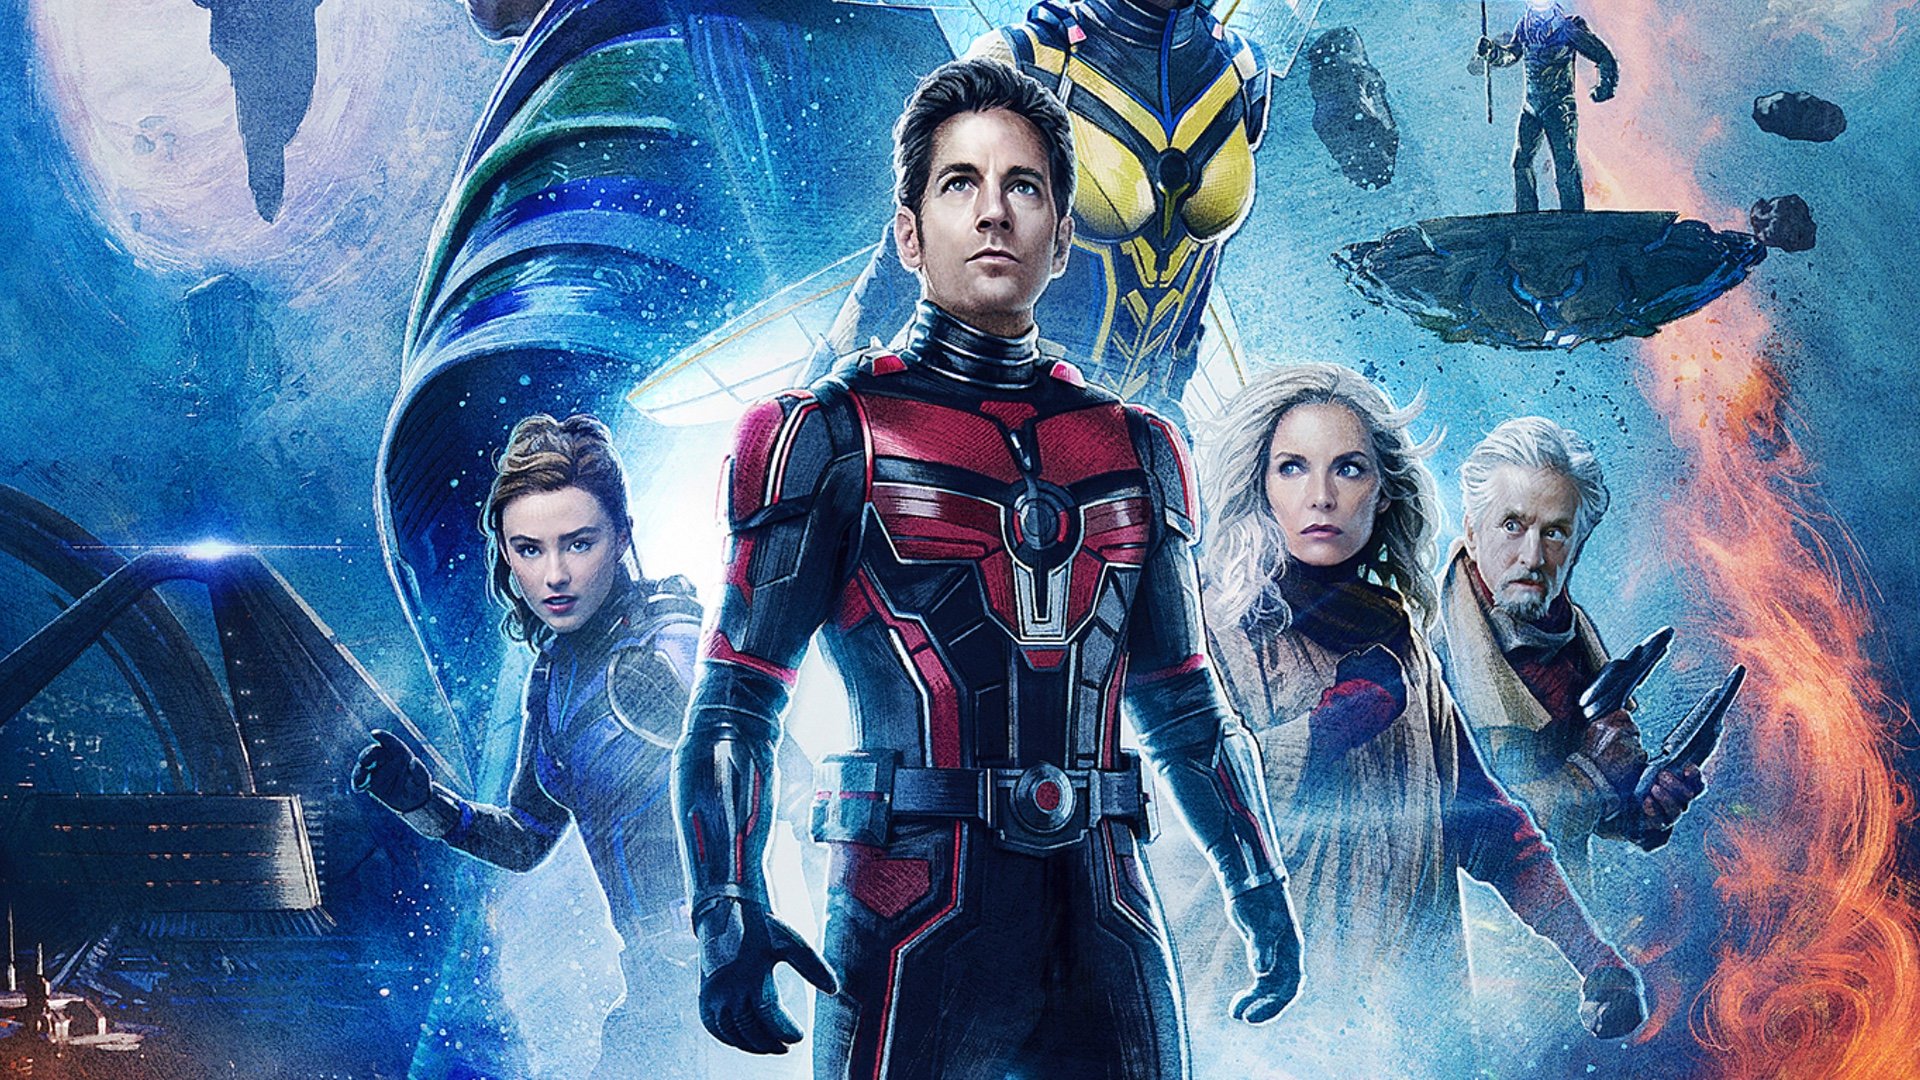 Ant-Man 3: What Marvel Movies and TV Shows Do You Need to Watch